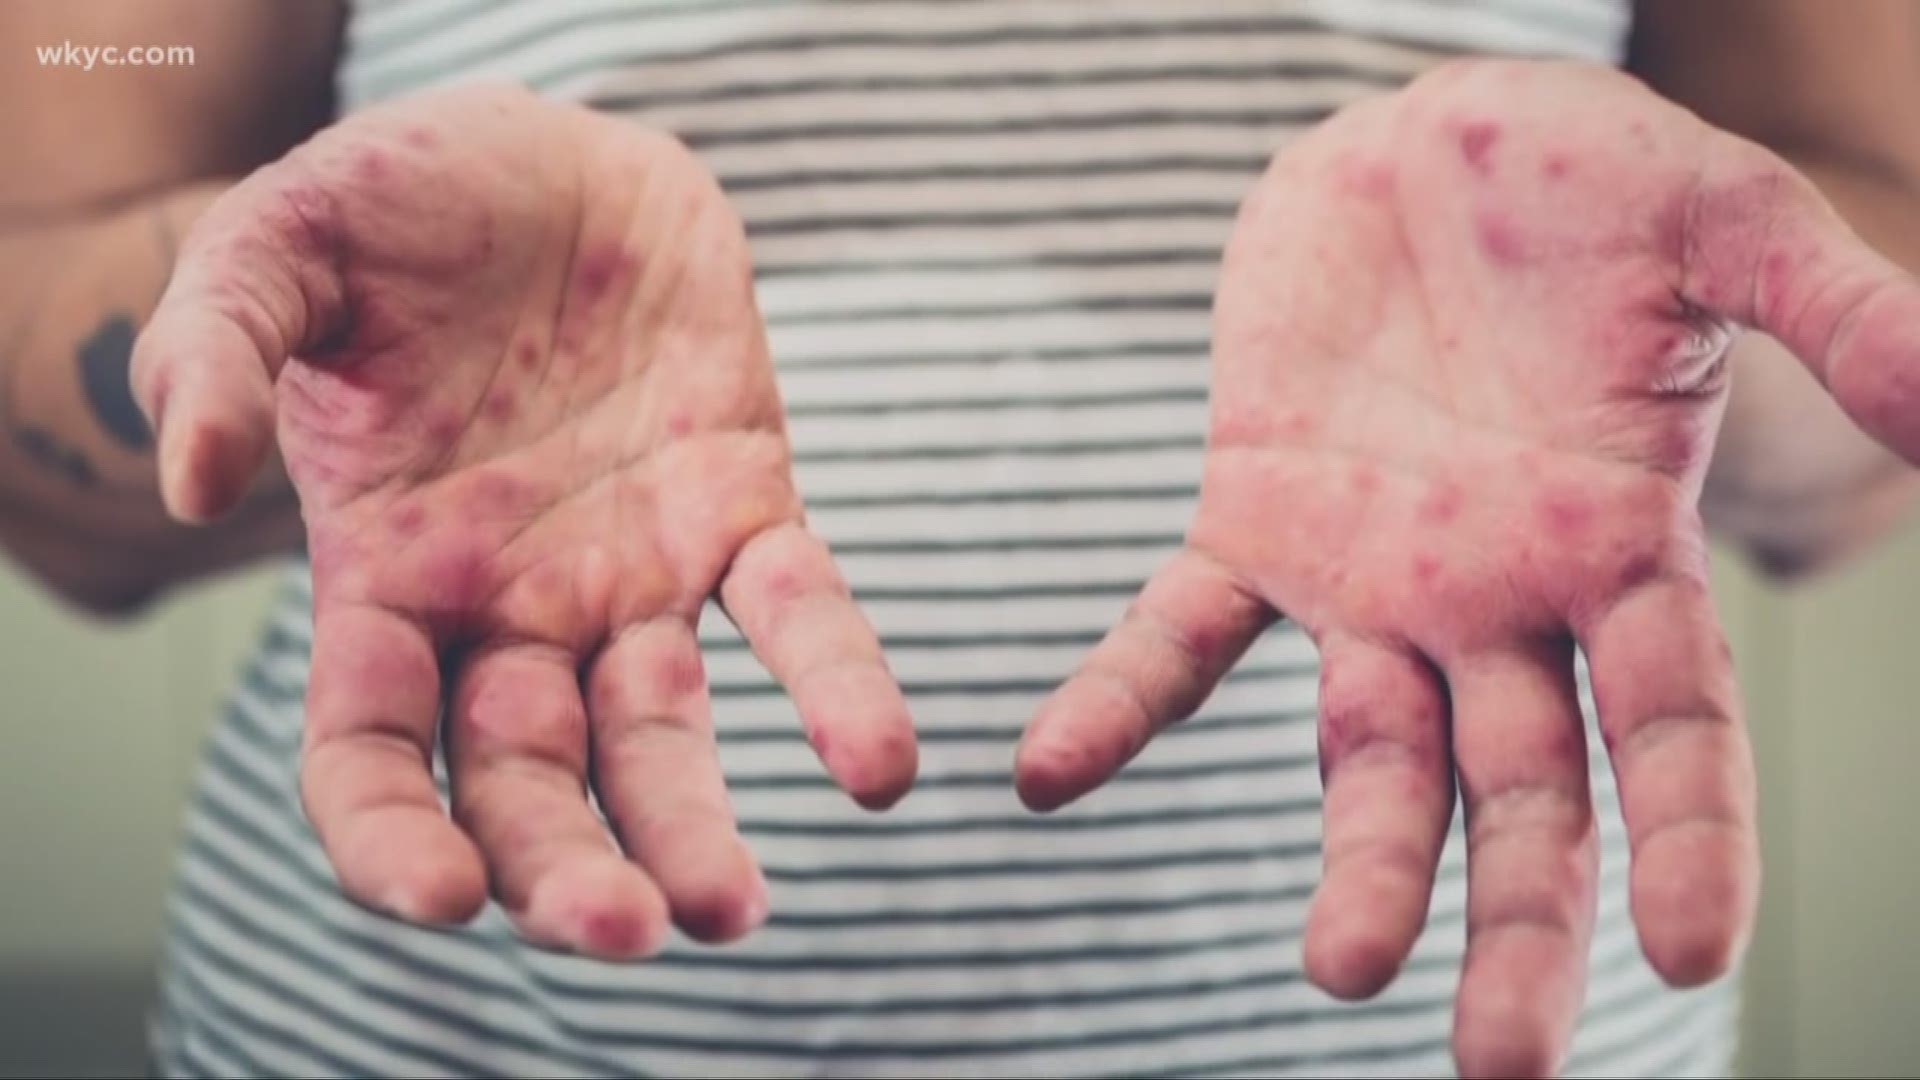 The Ohio Department on Health has confirmed the state's first measles case of 2019.  The department says the patient is an unvaccinated young adult from Stark County who recently traveled to a state with confirmed measles cases.